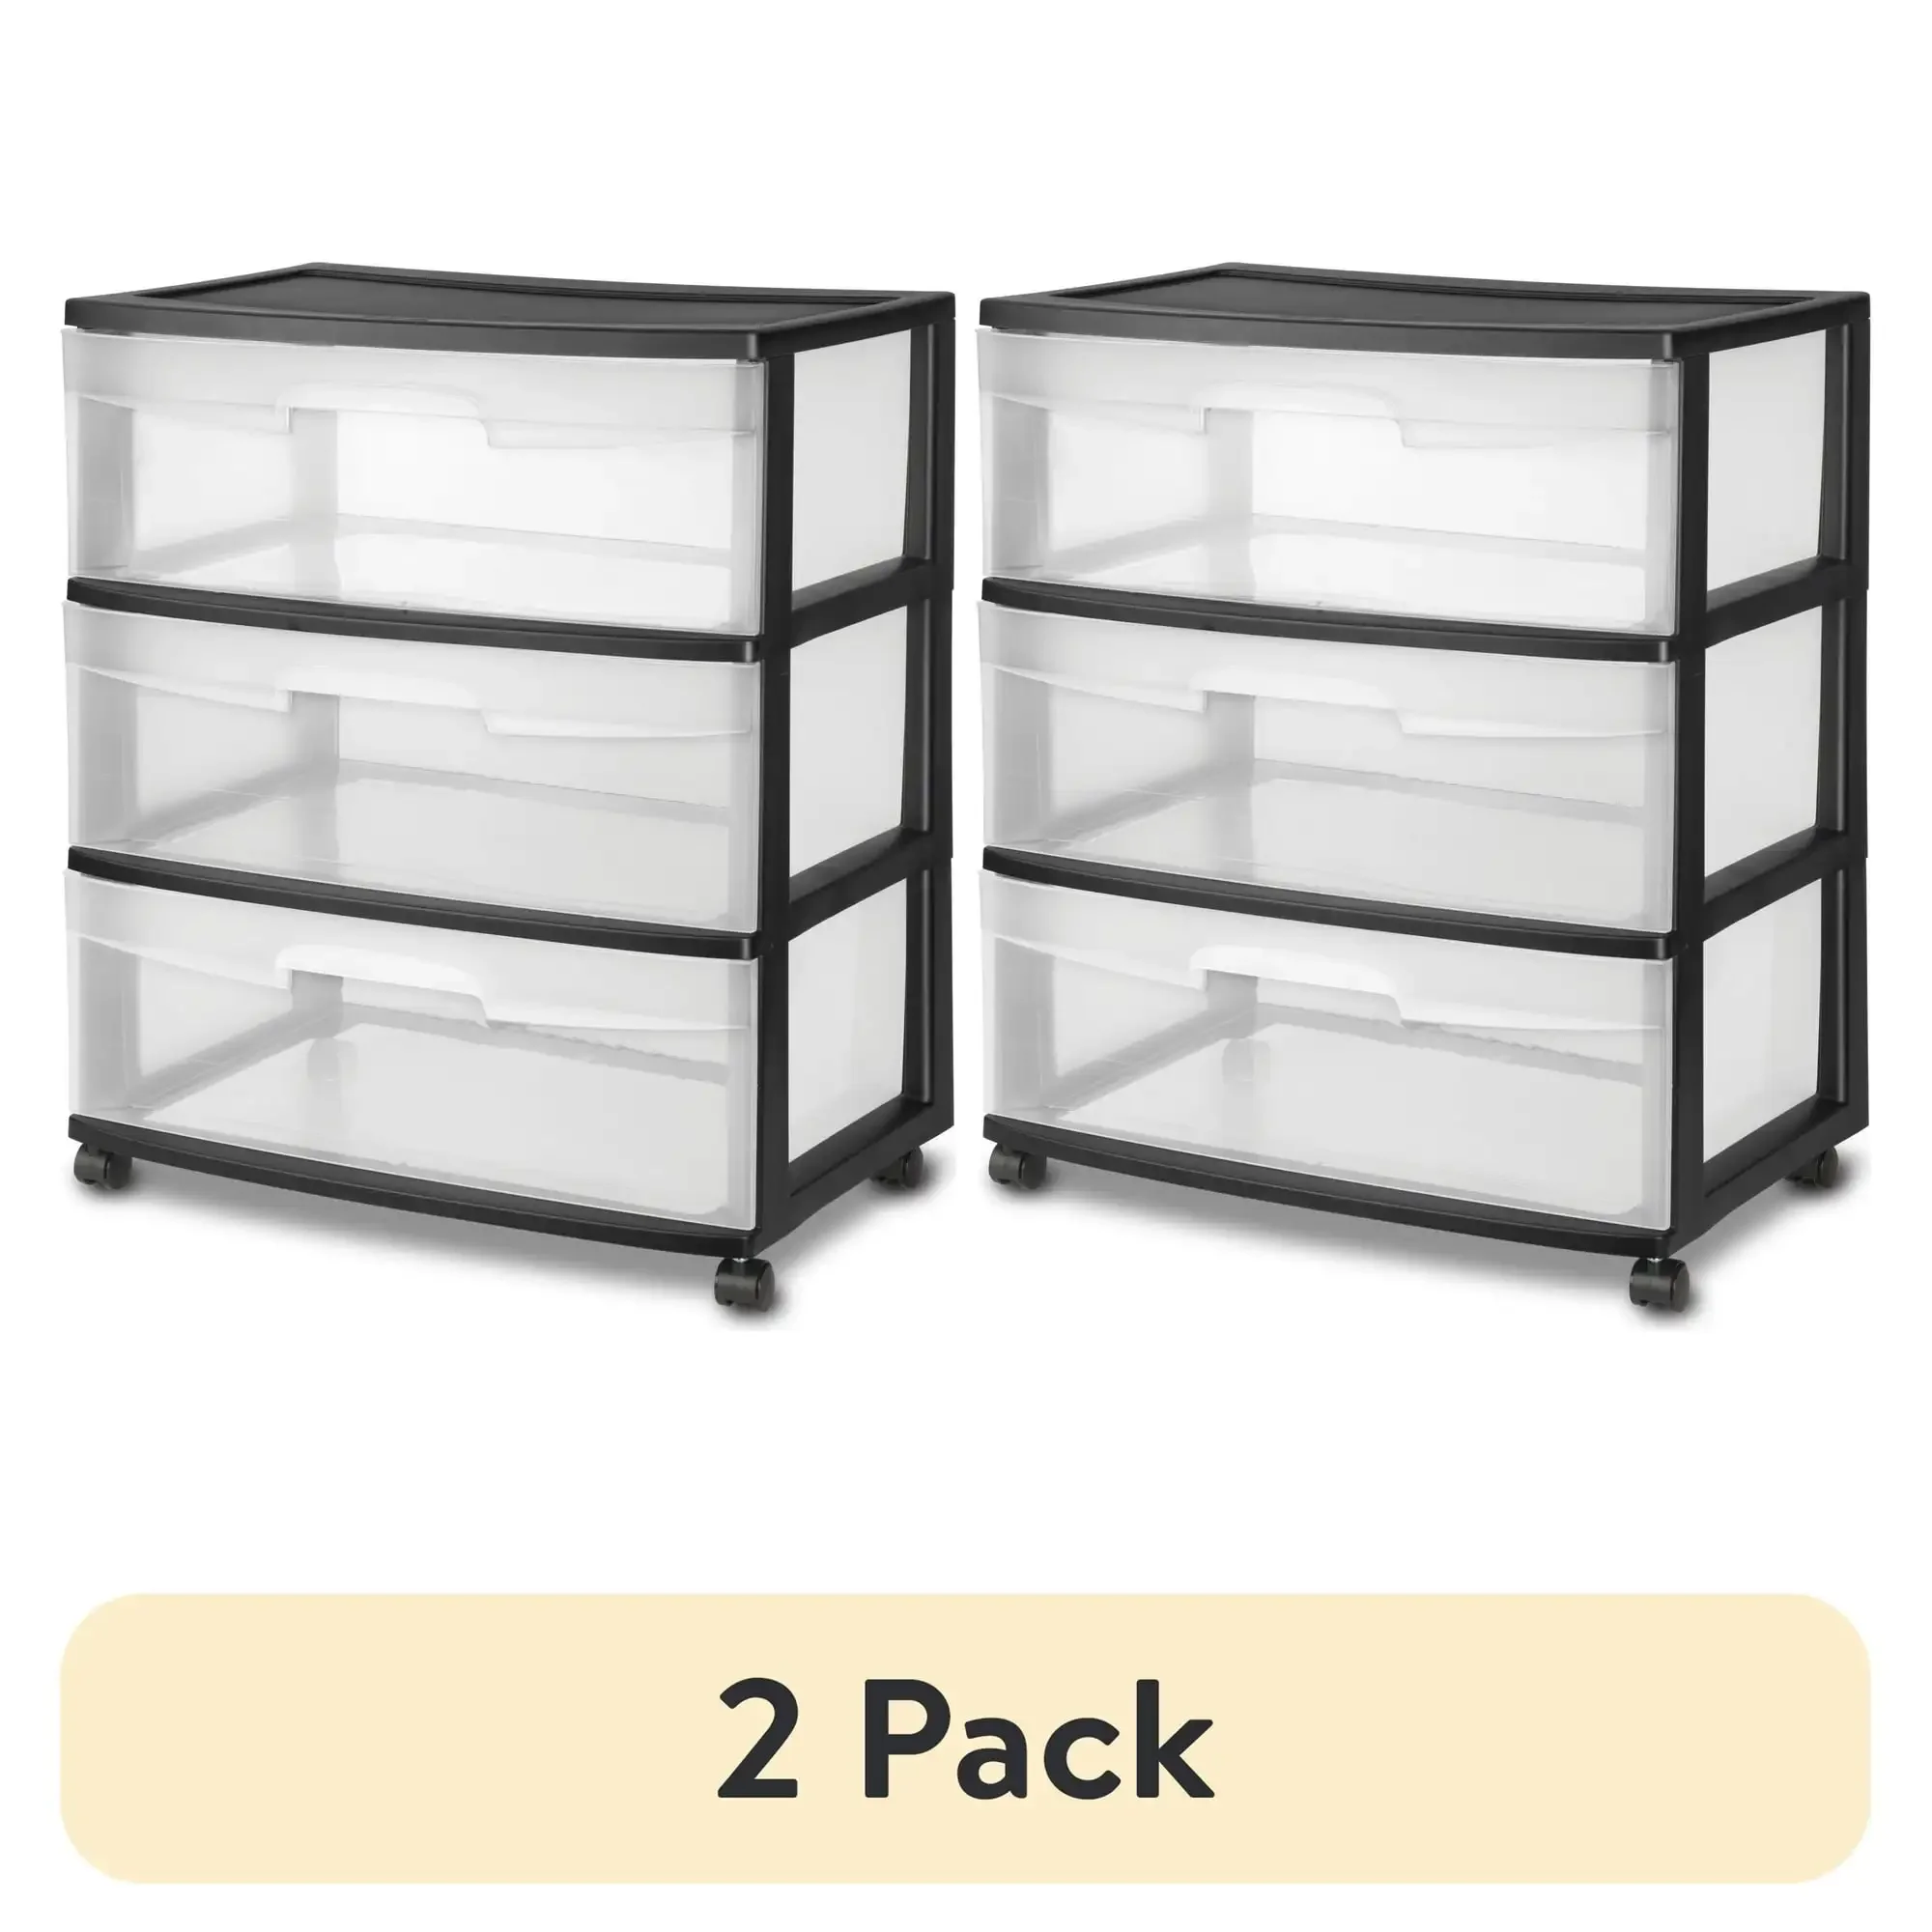 

(2 pack) Sterilite Wide 3 Drawer Cart Black Outside Dimensions: 15 1/4" x 21 7/8" x 24" USA